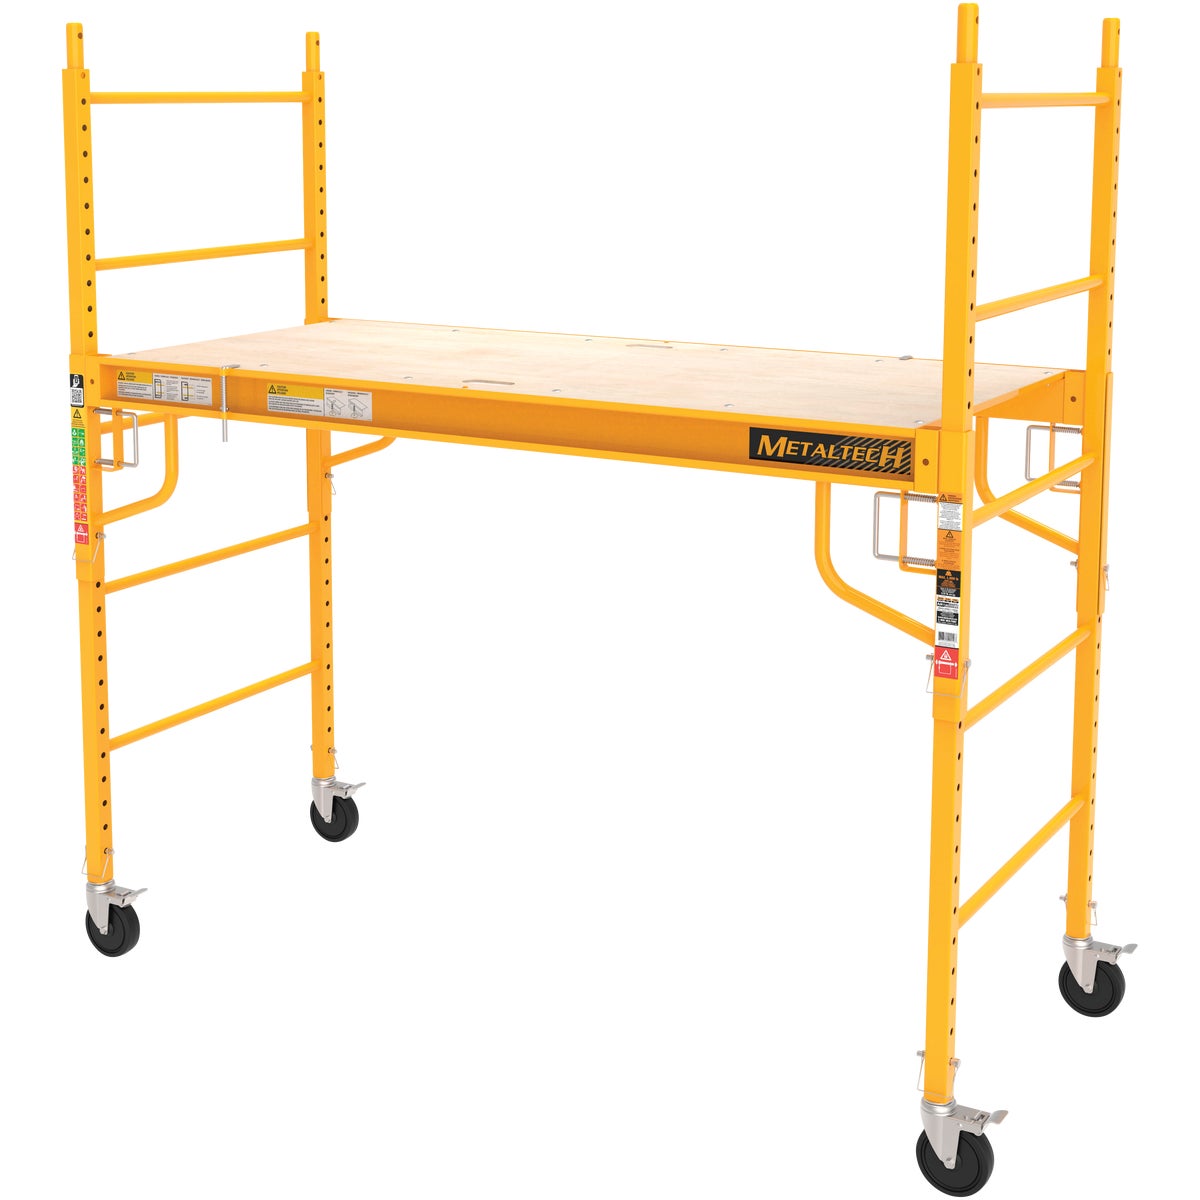 Item 777823, This MetalTech multipurpose maxi square Baker-style rolling scaffold 